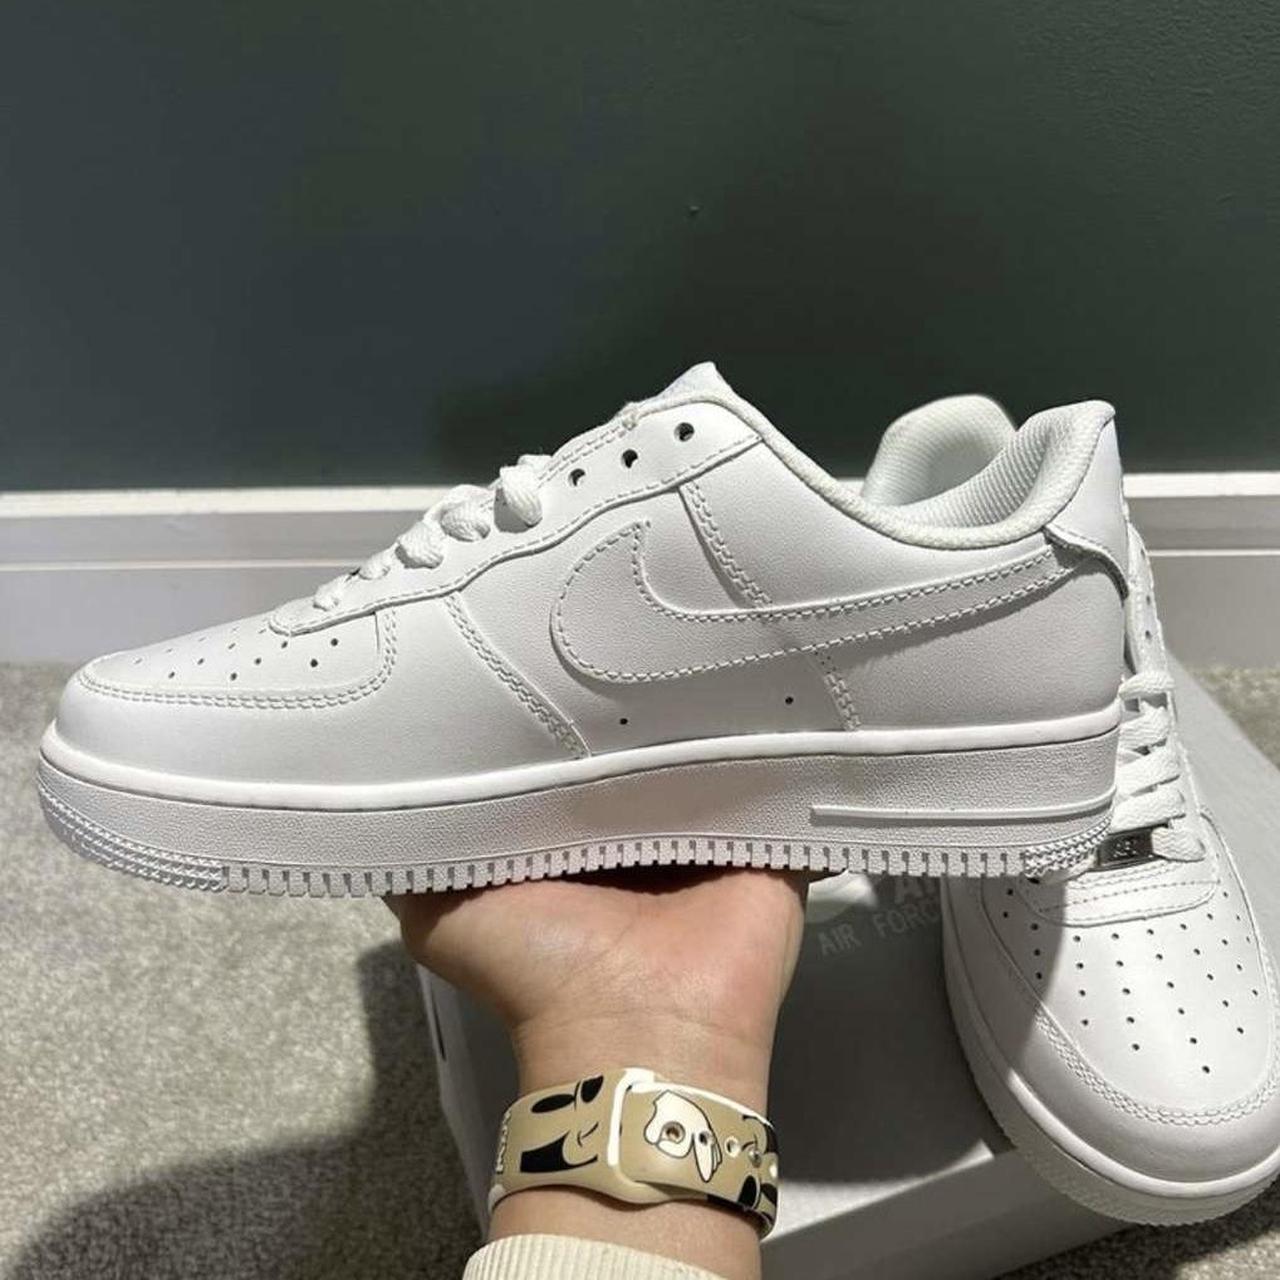 Nike airforce 1 In most adult sizes - Depop